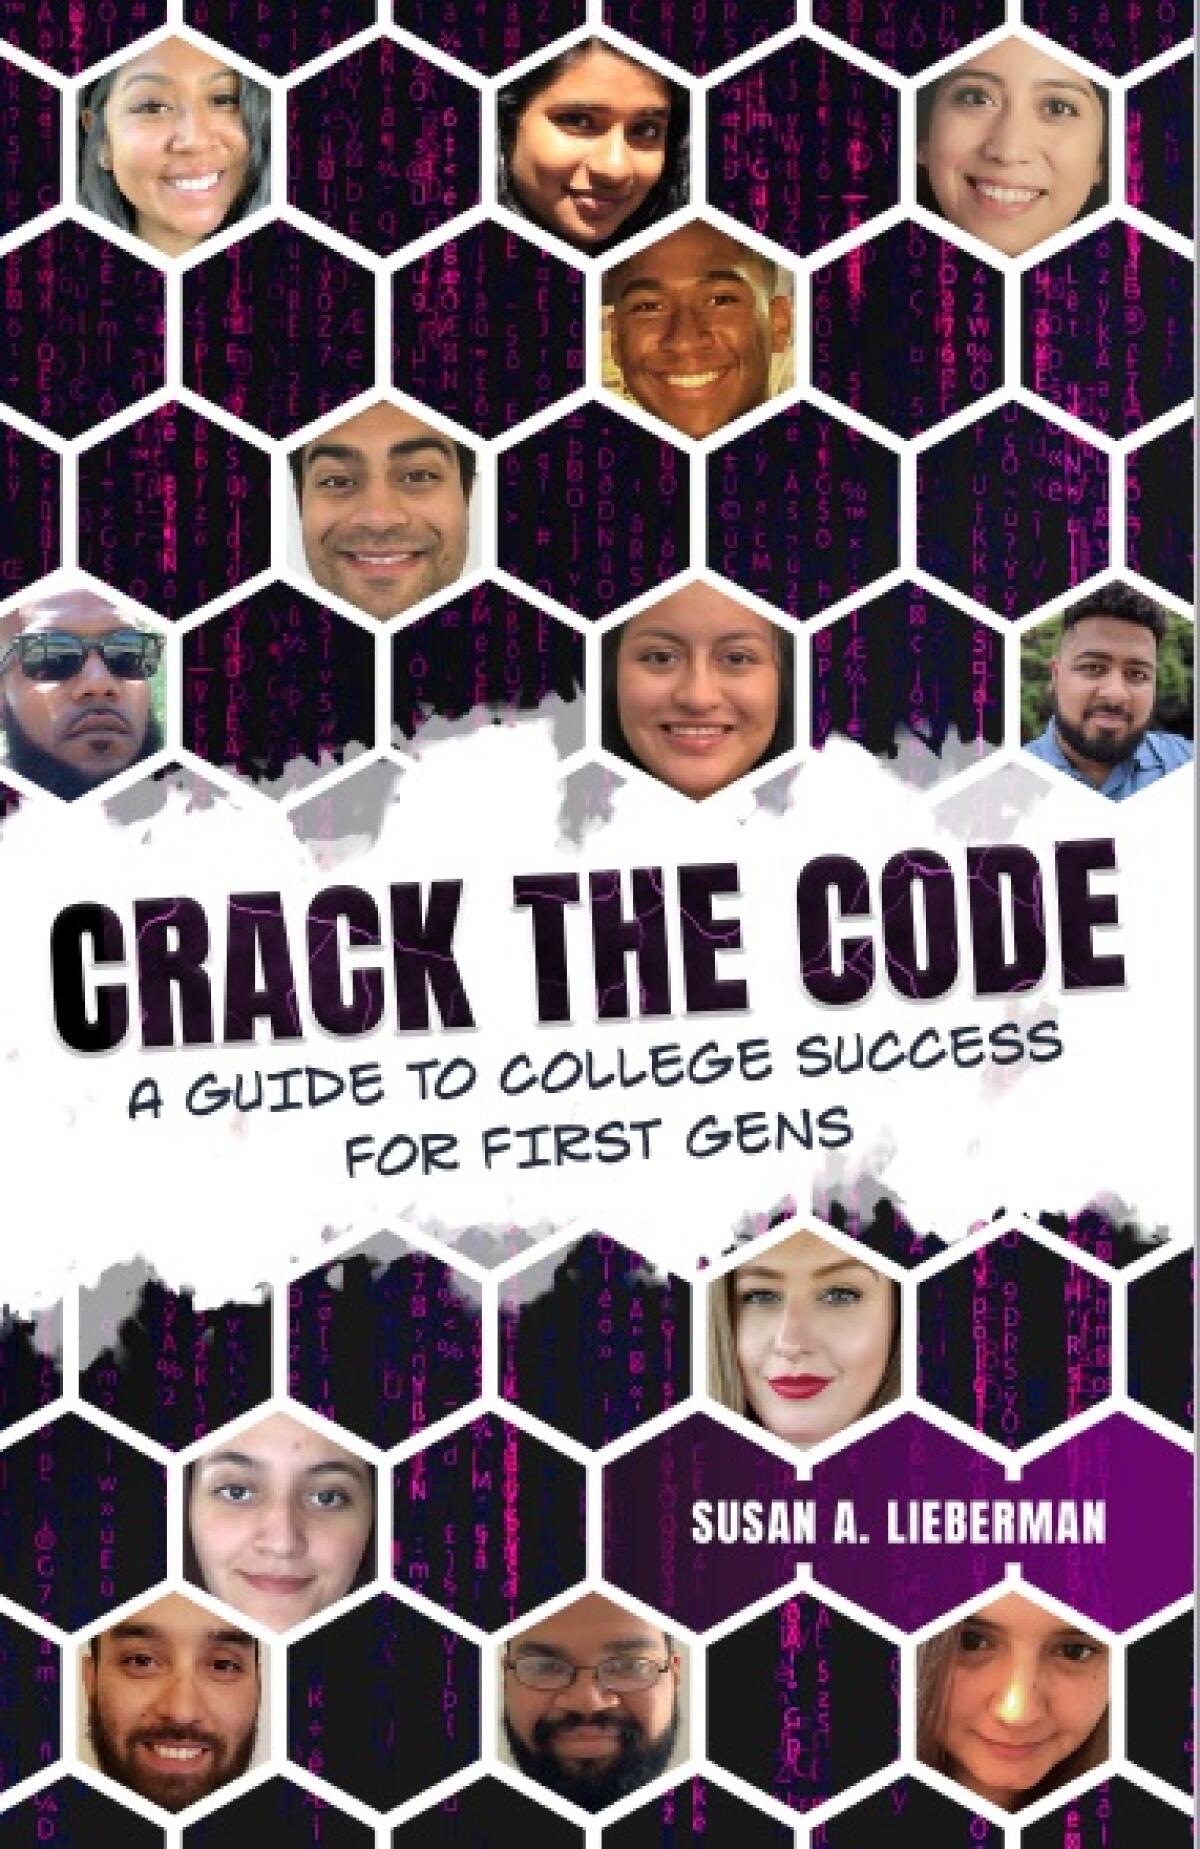 La Jolla resident Susan Lieberman wrote "Crack the Code: A Guide to College Success for First Gens." 